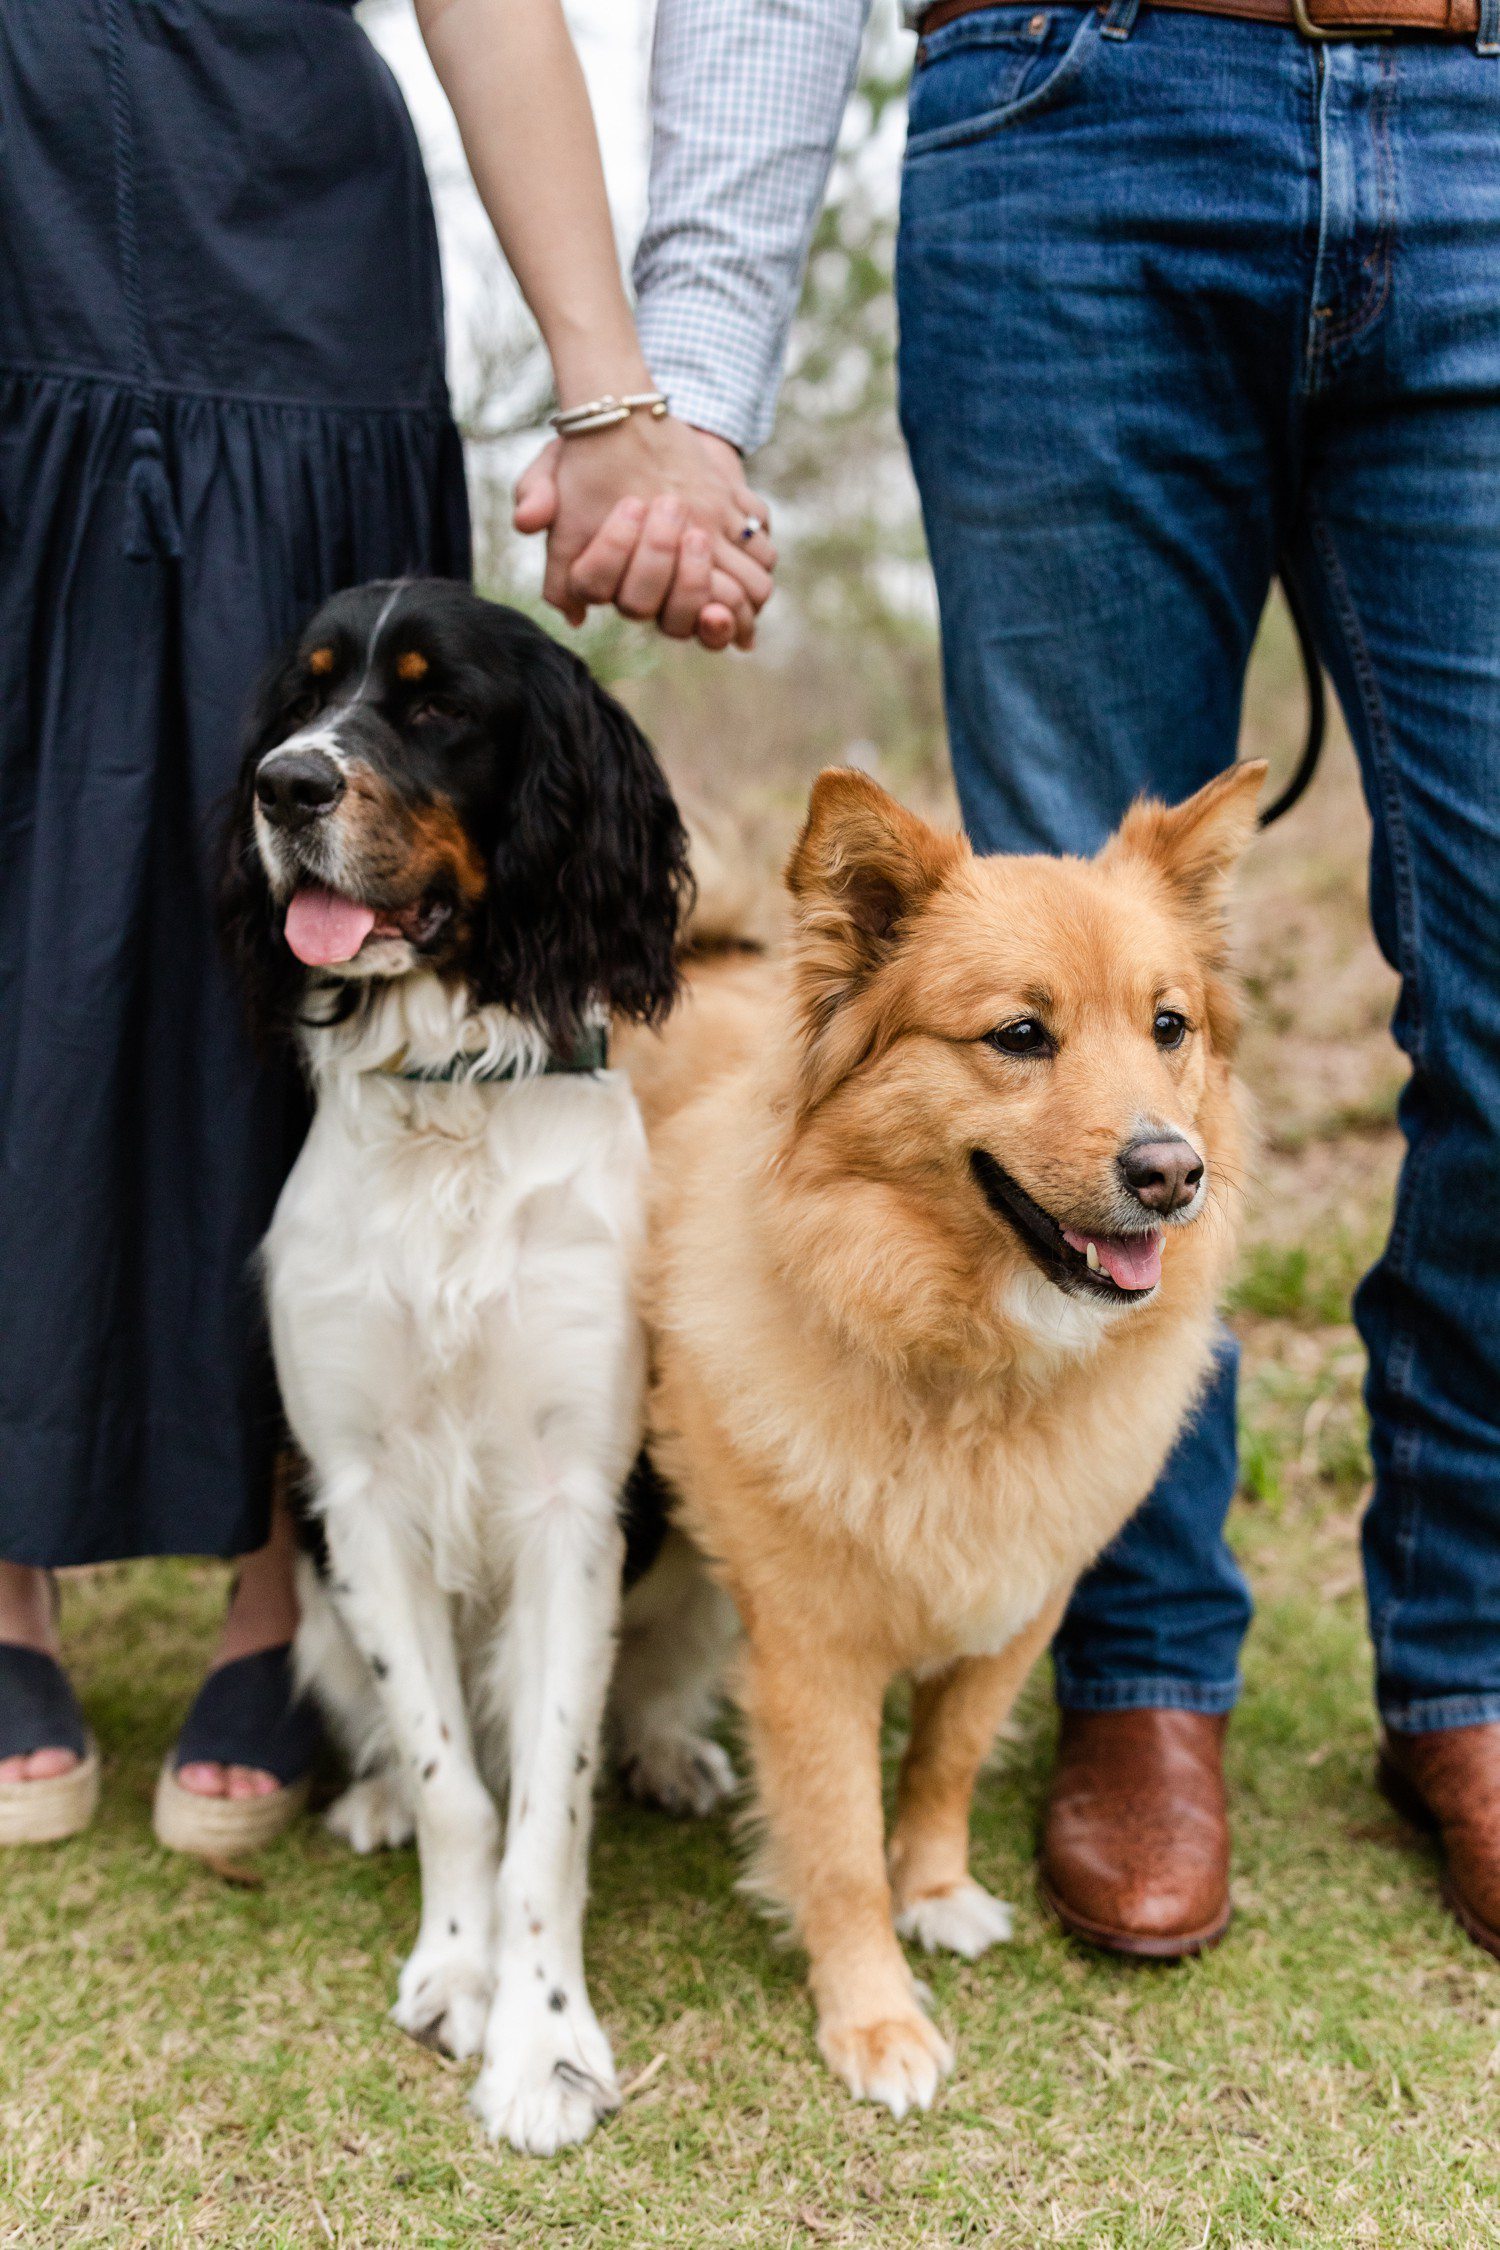 Including dogs into engagement photos. 